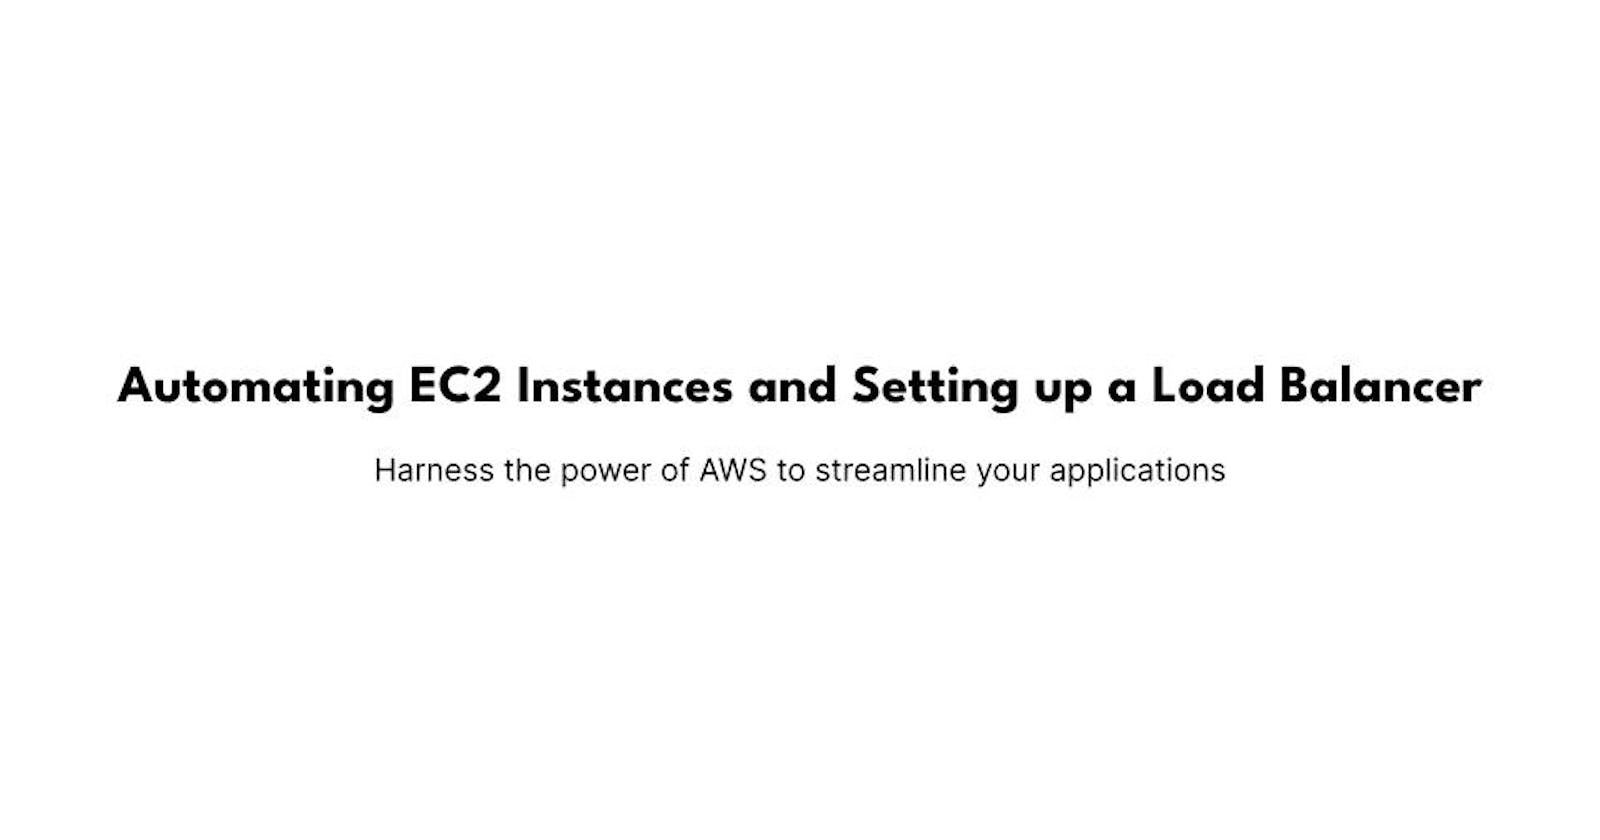 EC2 Automation and Setting up a Load Balancer